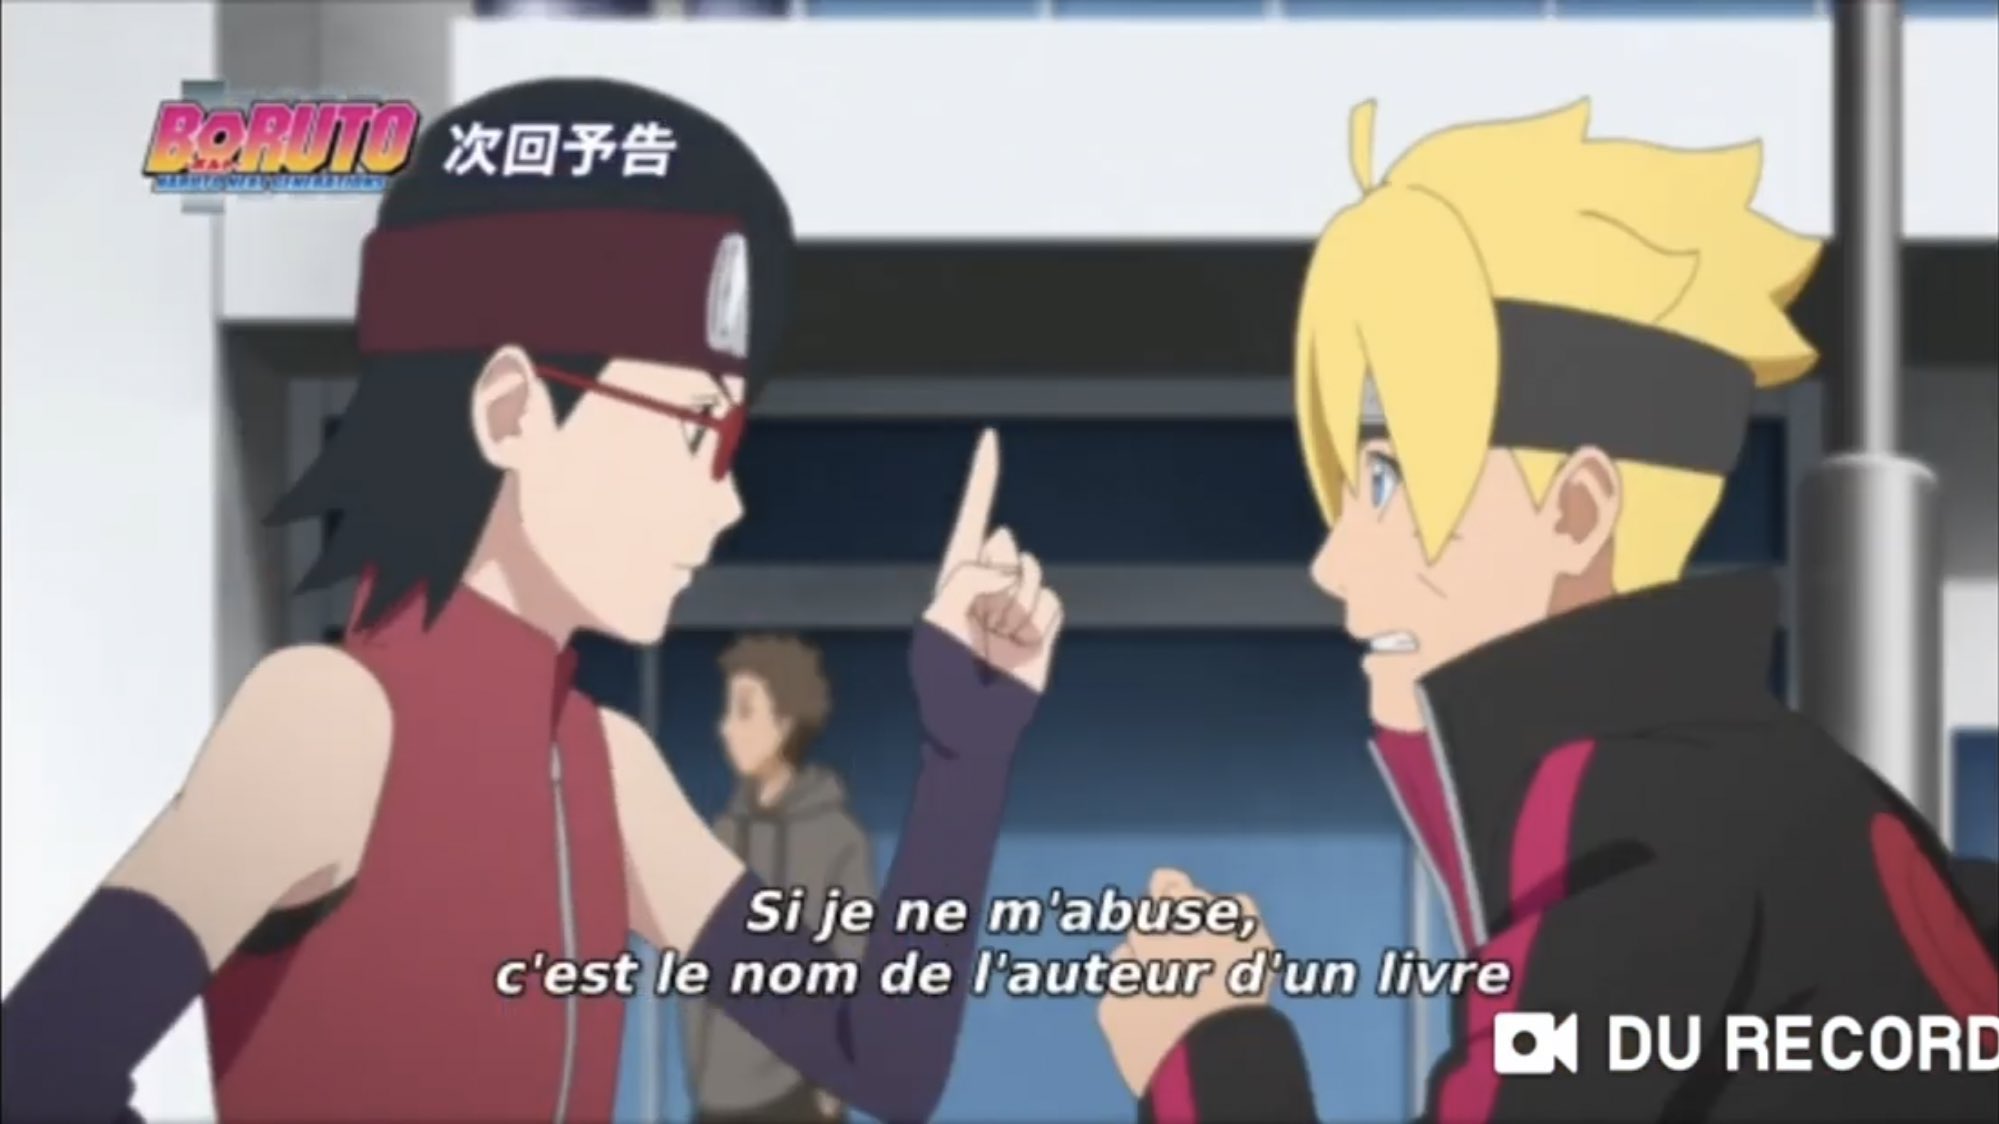 Abdul Zoldyck on X: #Boruto Boruto vs Urashiki, this fight will be over  before it begins. I just hope that urashiki doesn't steal Boruto's Chakra,  we can't allow him to get hurt😢😨.